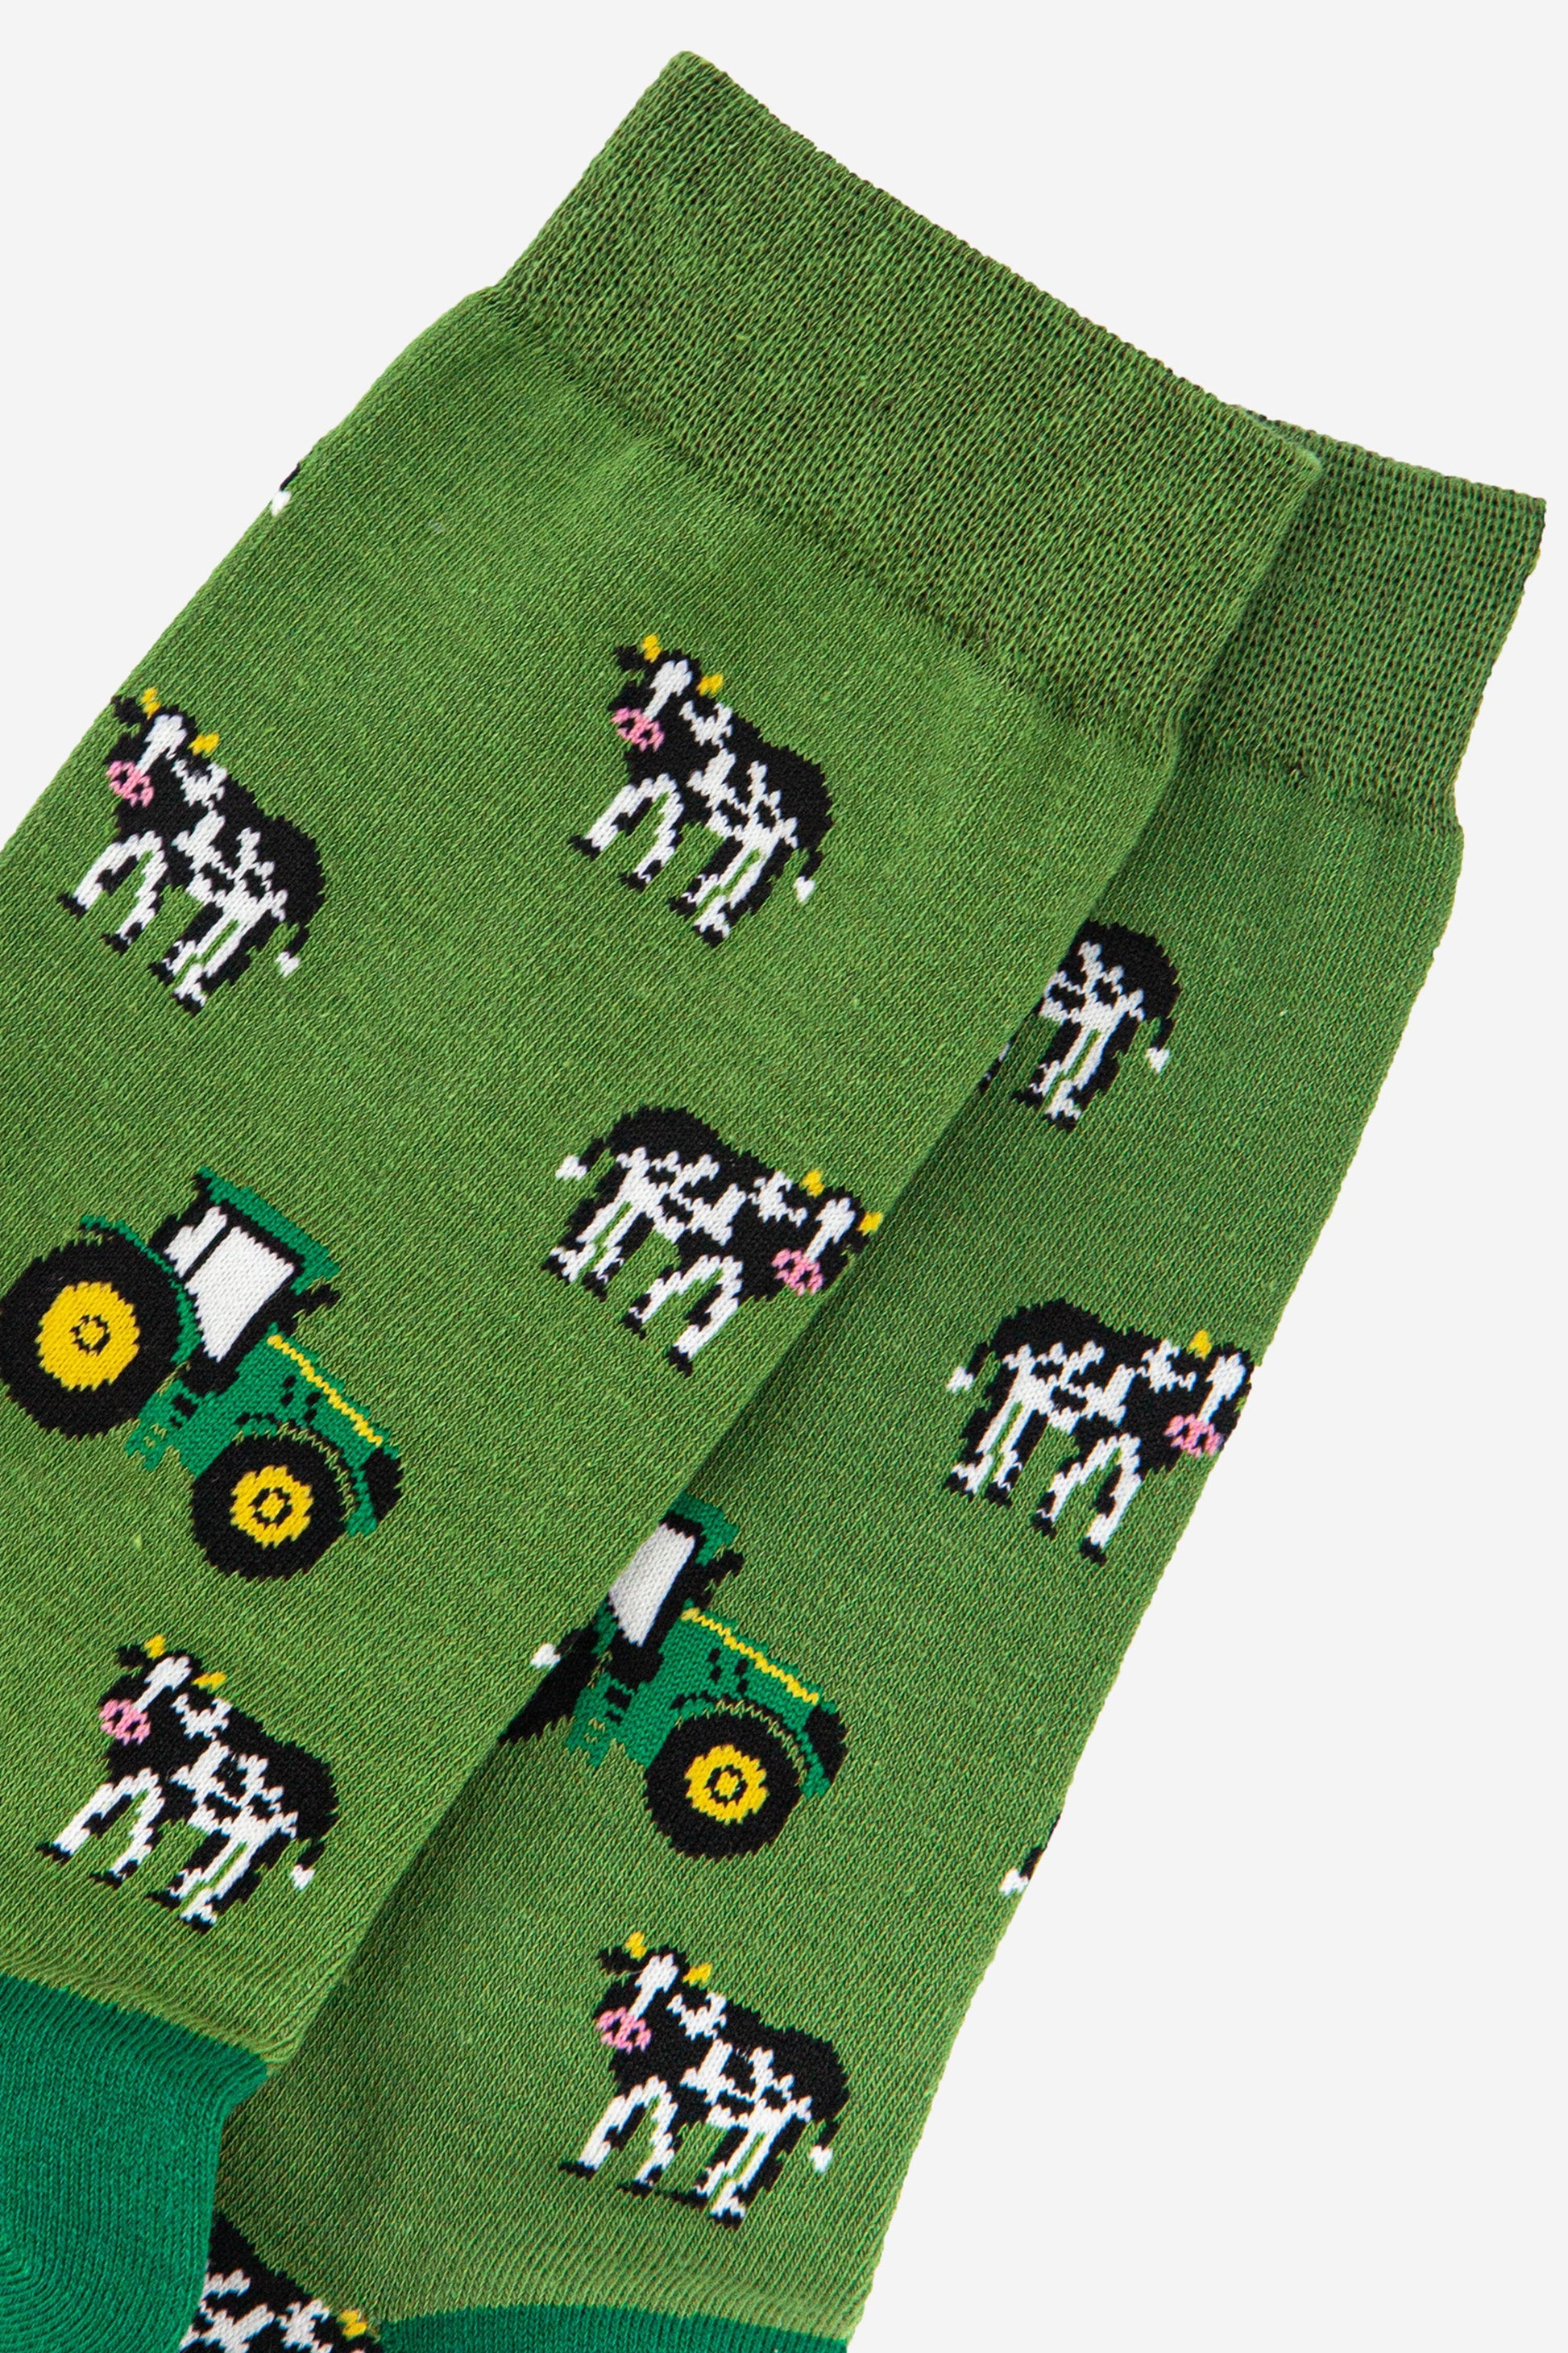 close up of the green tractors and black and white cow pattern on the bamboo socks